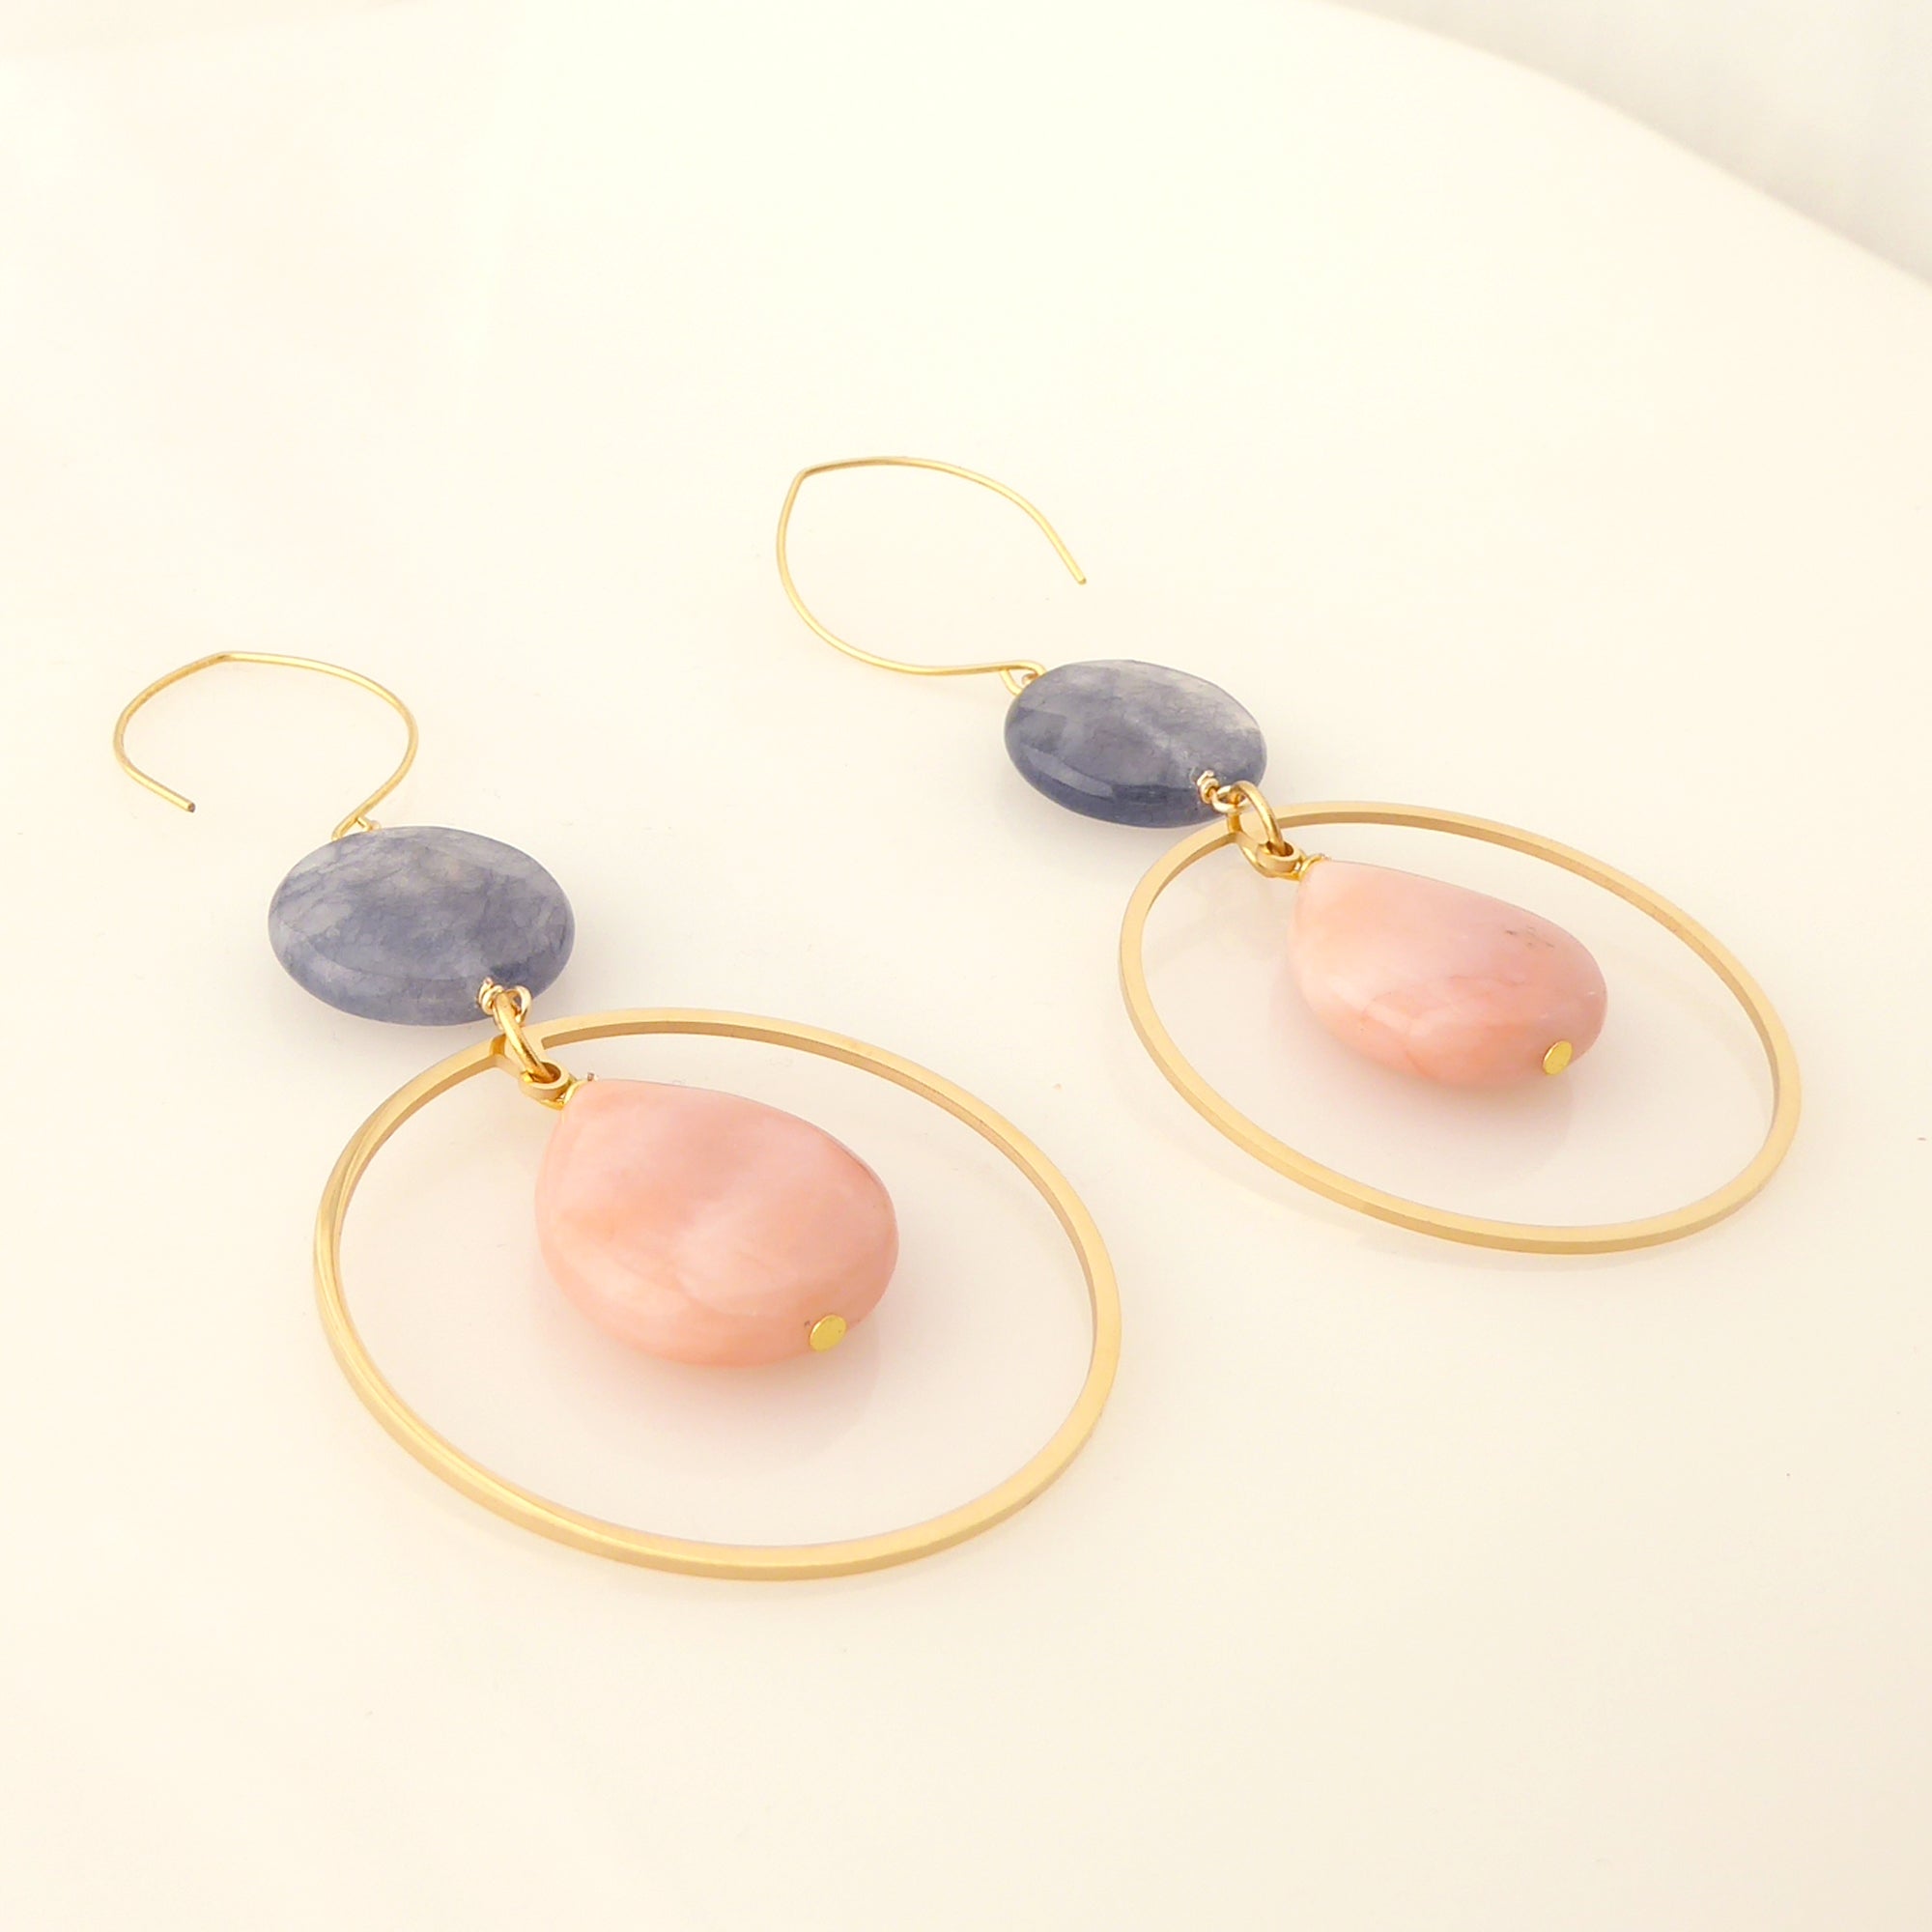 Peach aventurine and storm quartz earrings by Jenny Dayco 2